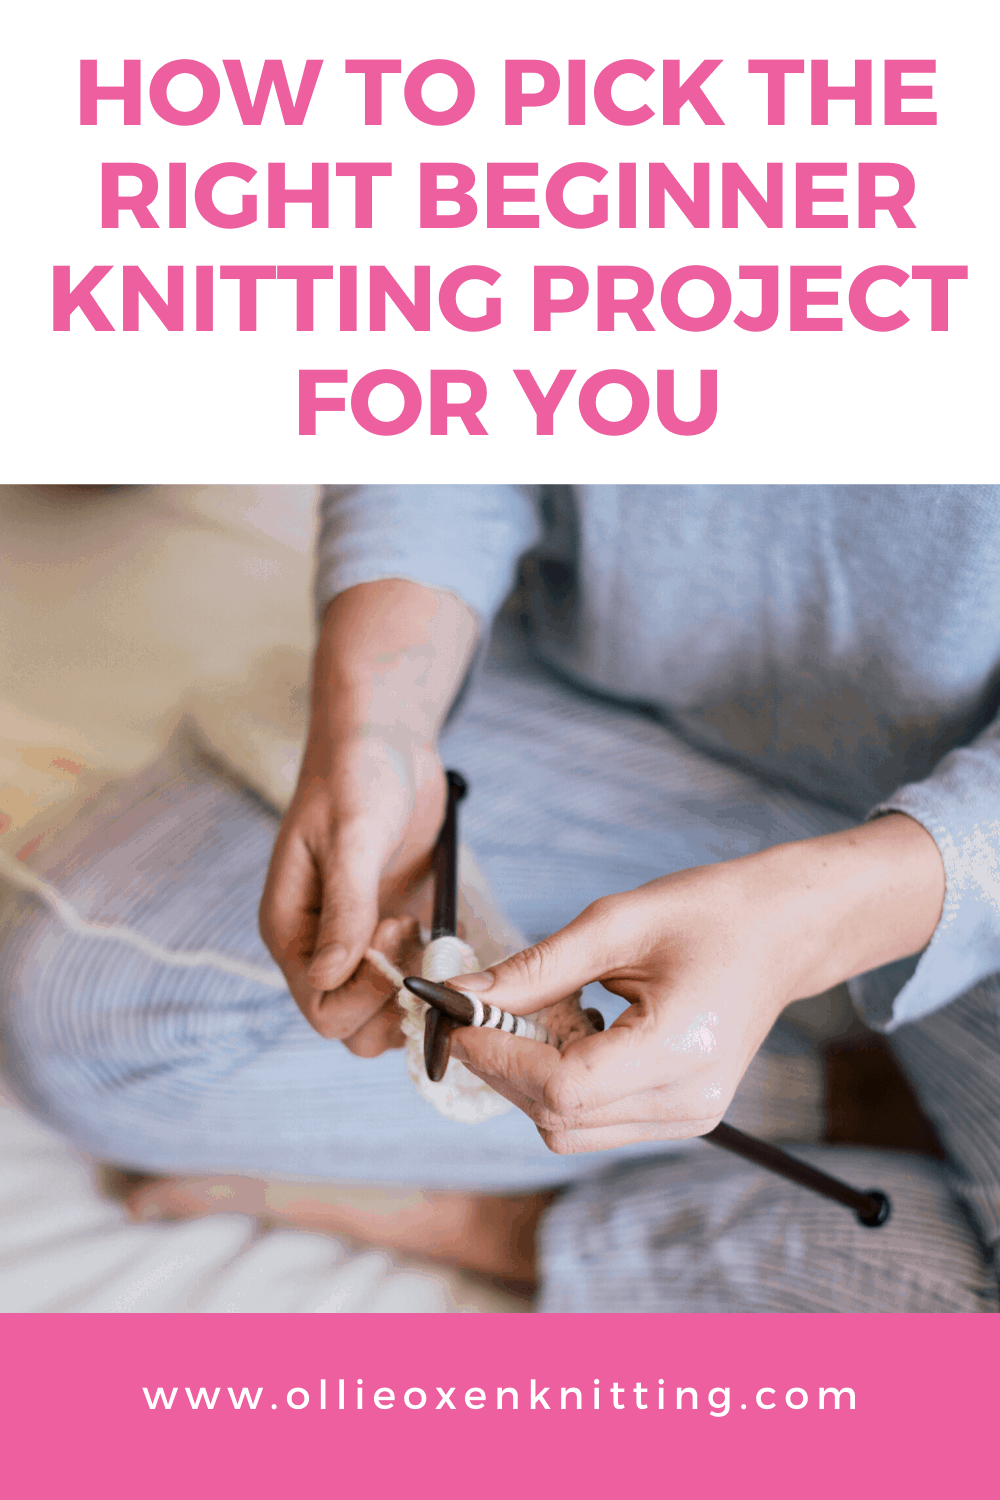 How To Pick The Right Beginner Knitting Project For You | Ollie Oxen Knitting